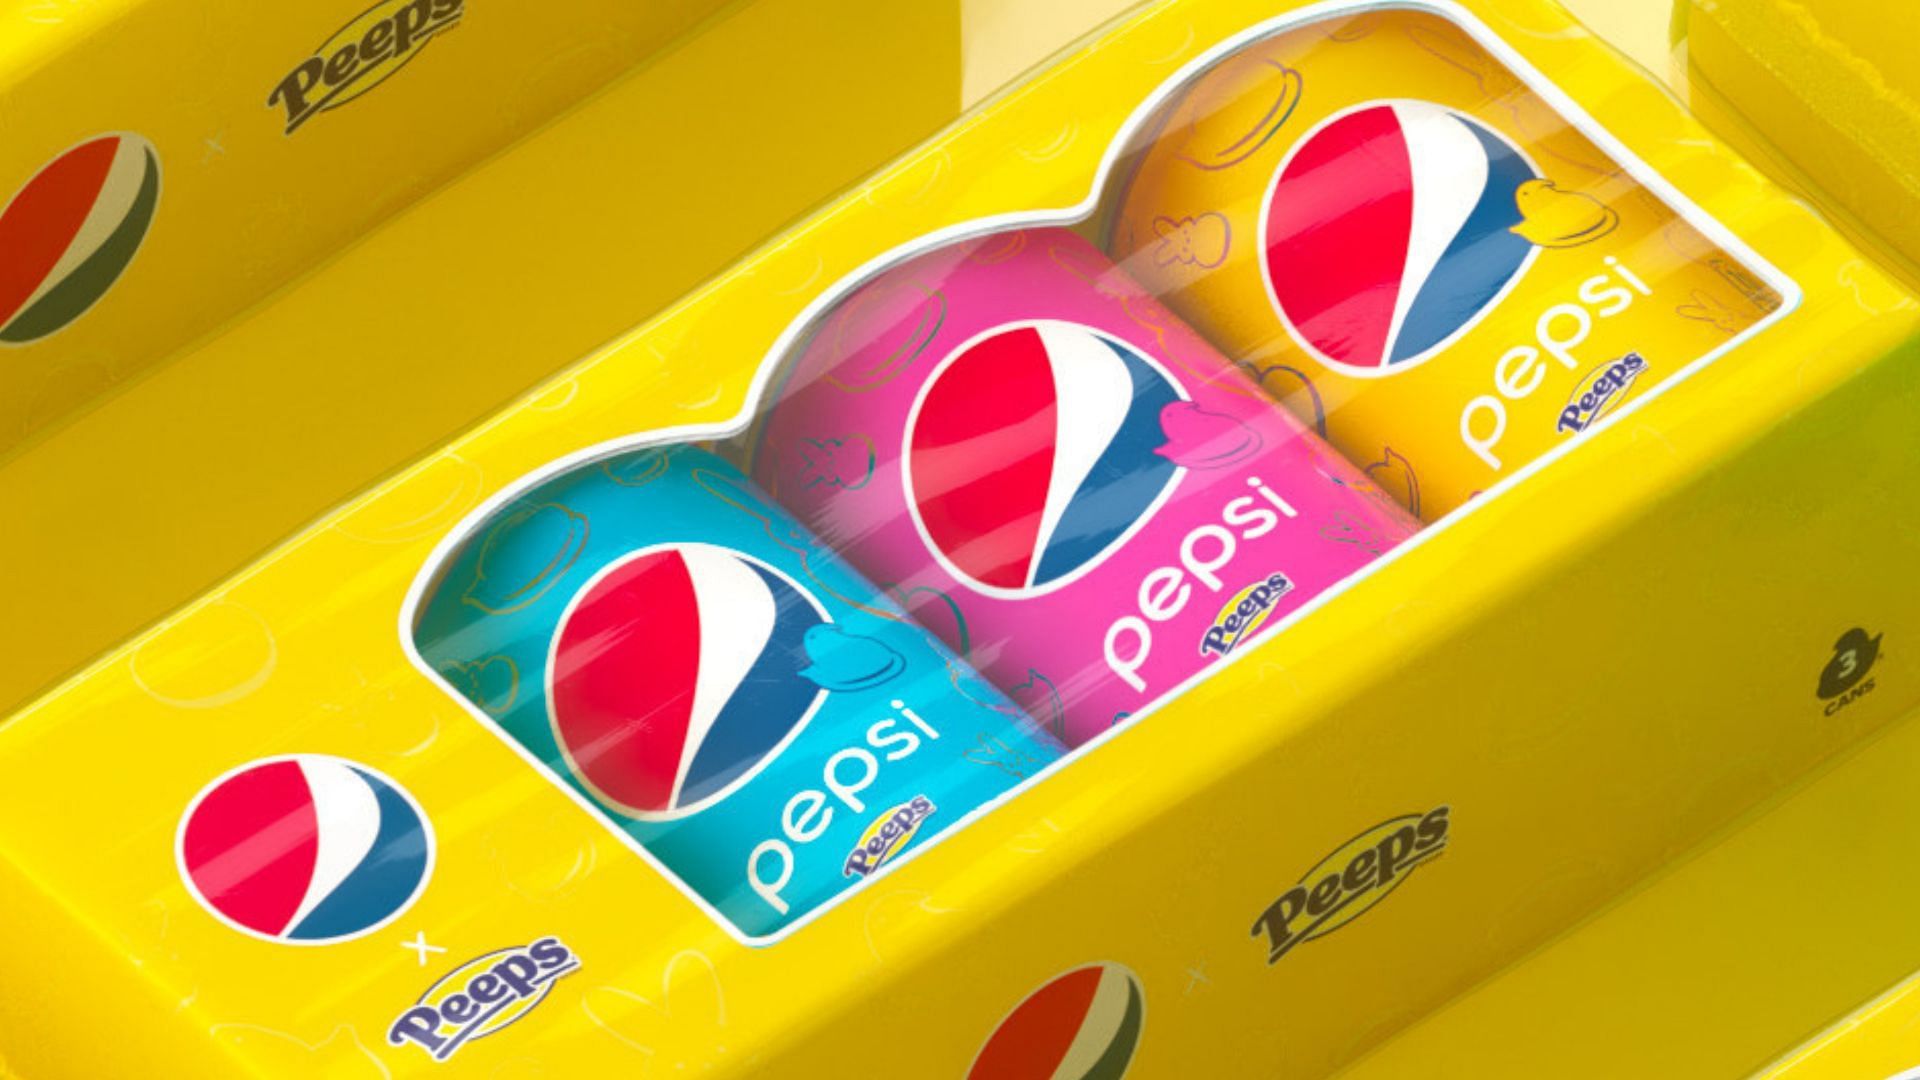 Pepsi Peeps soda Where to buy, release date, price, and all you need